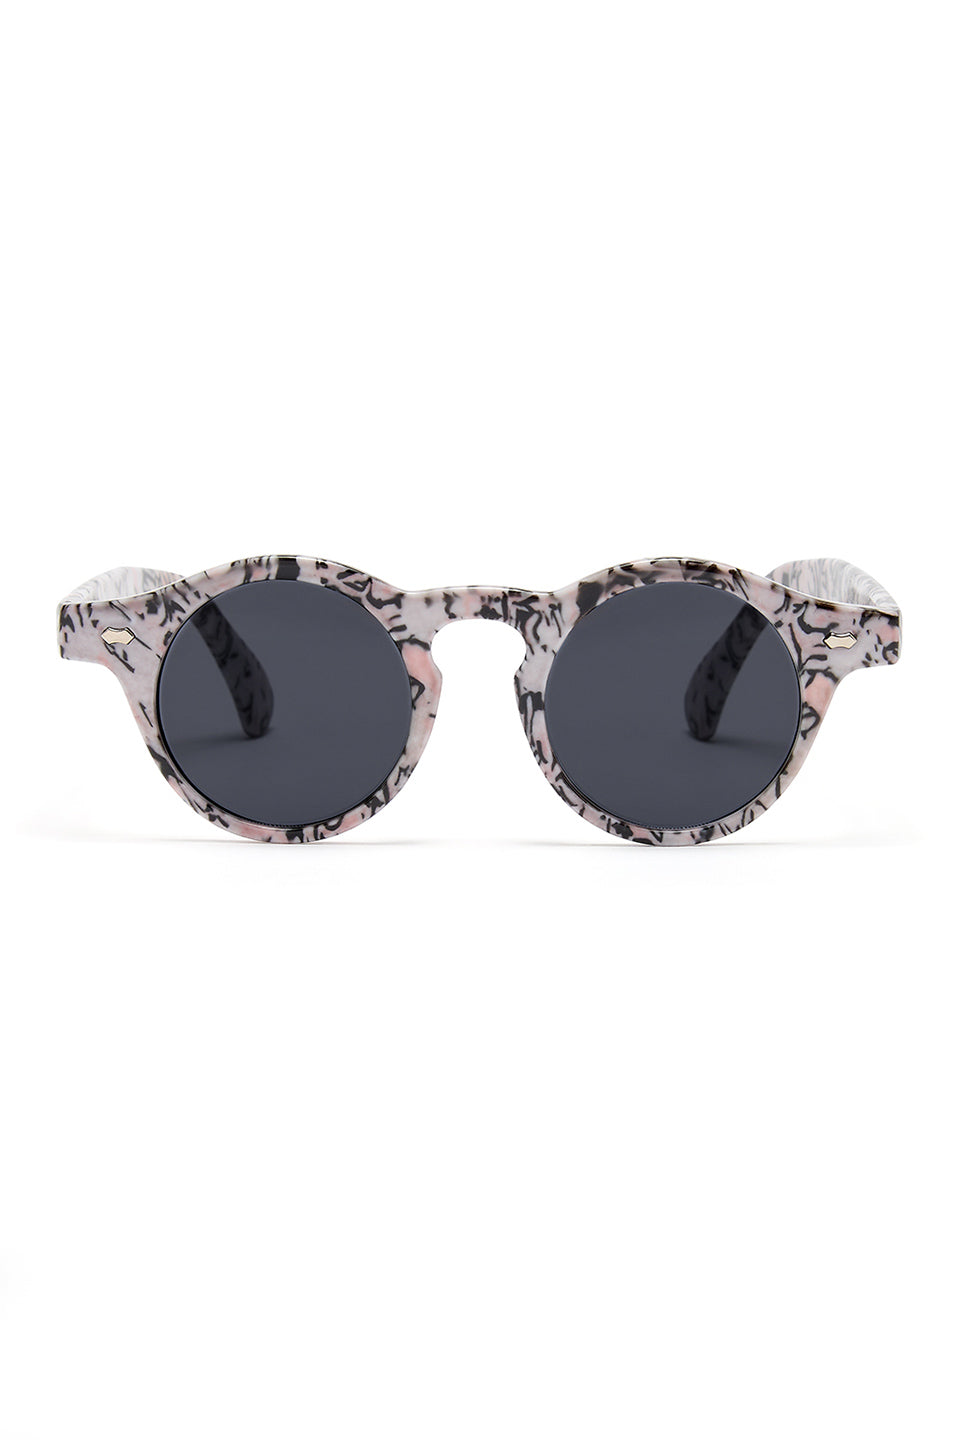  Round Leopard Sunglasses  |  1930s & 1940s Style | Weekend Doll